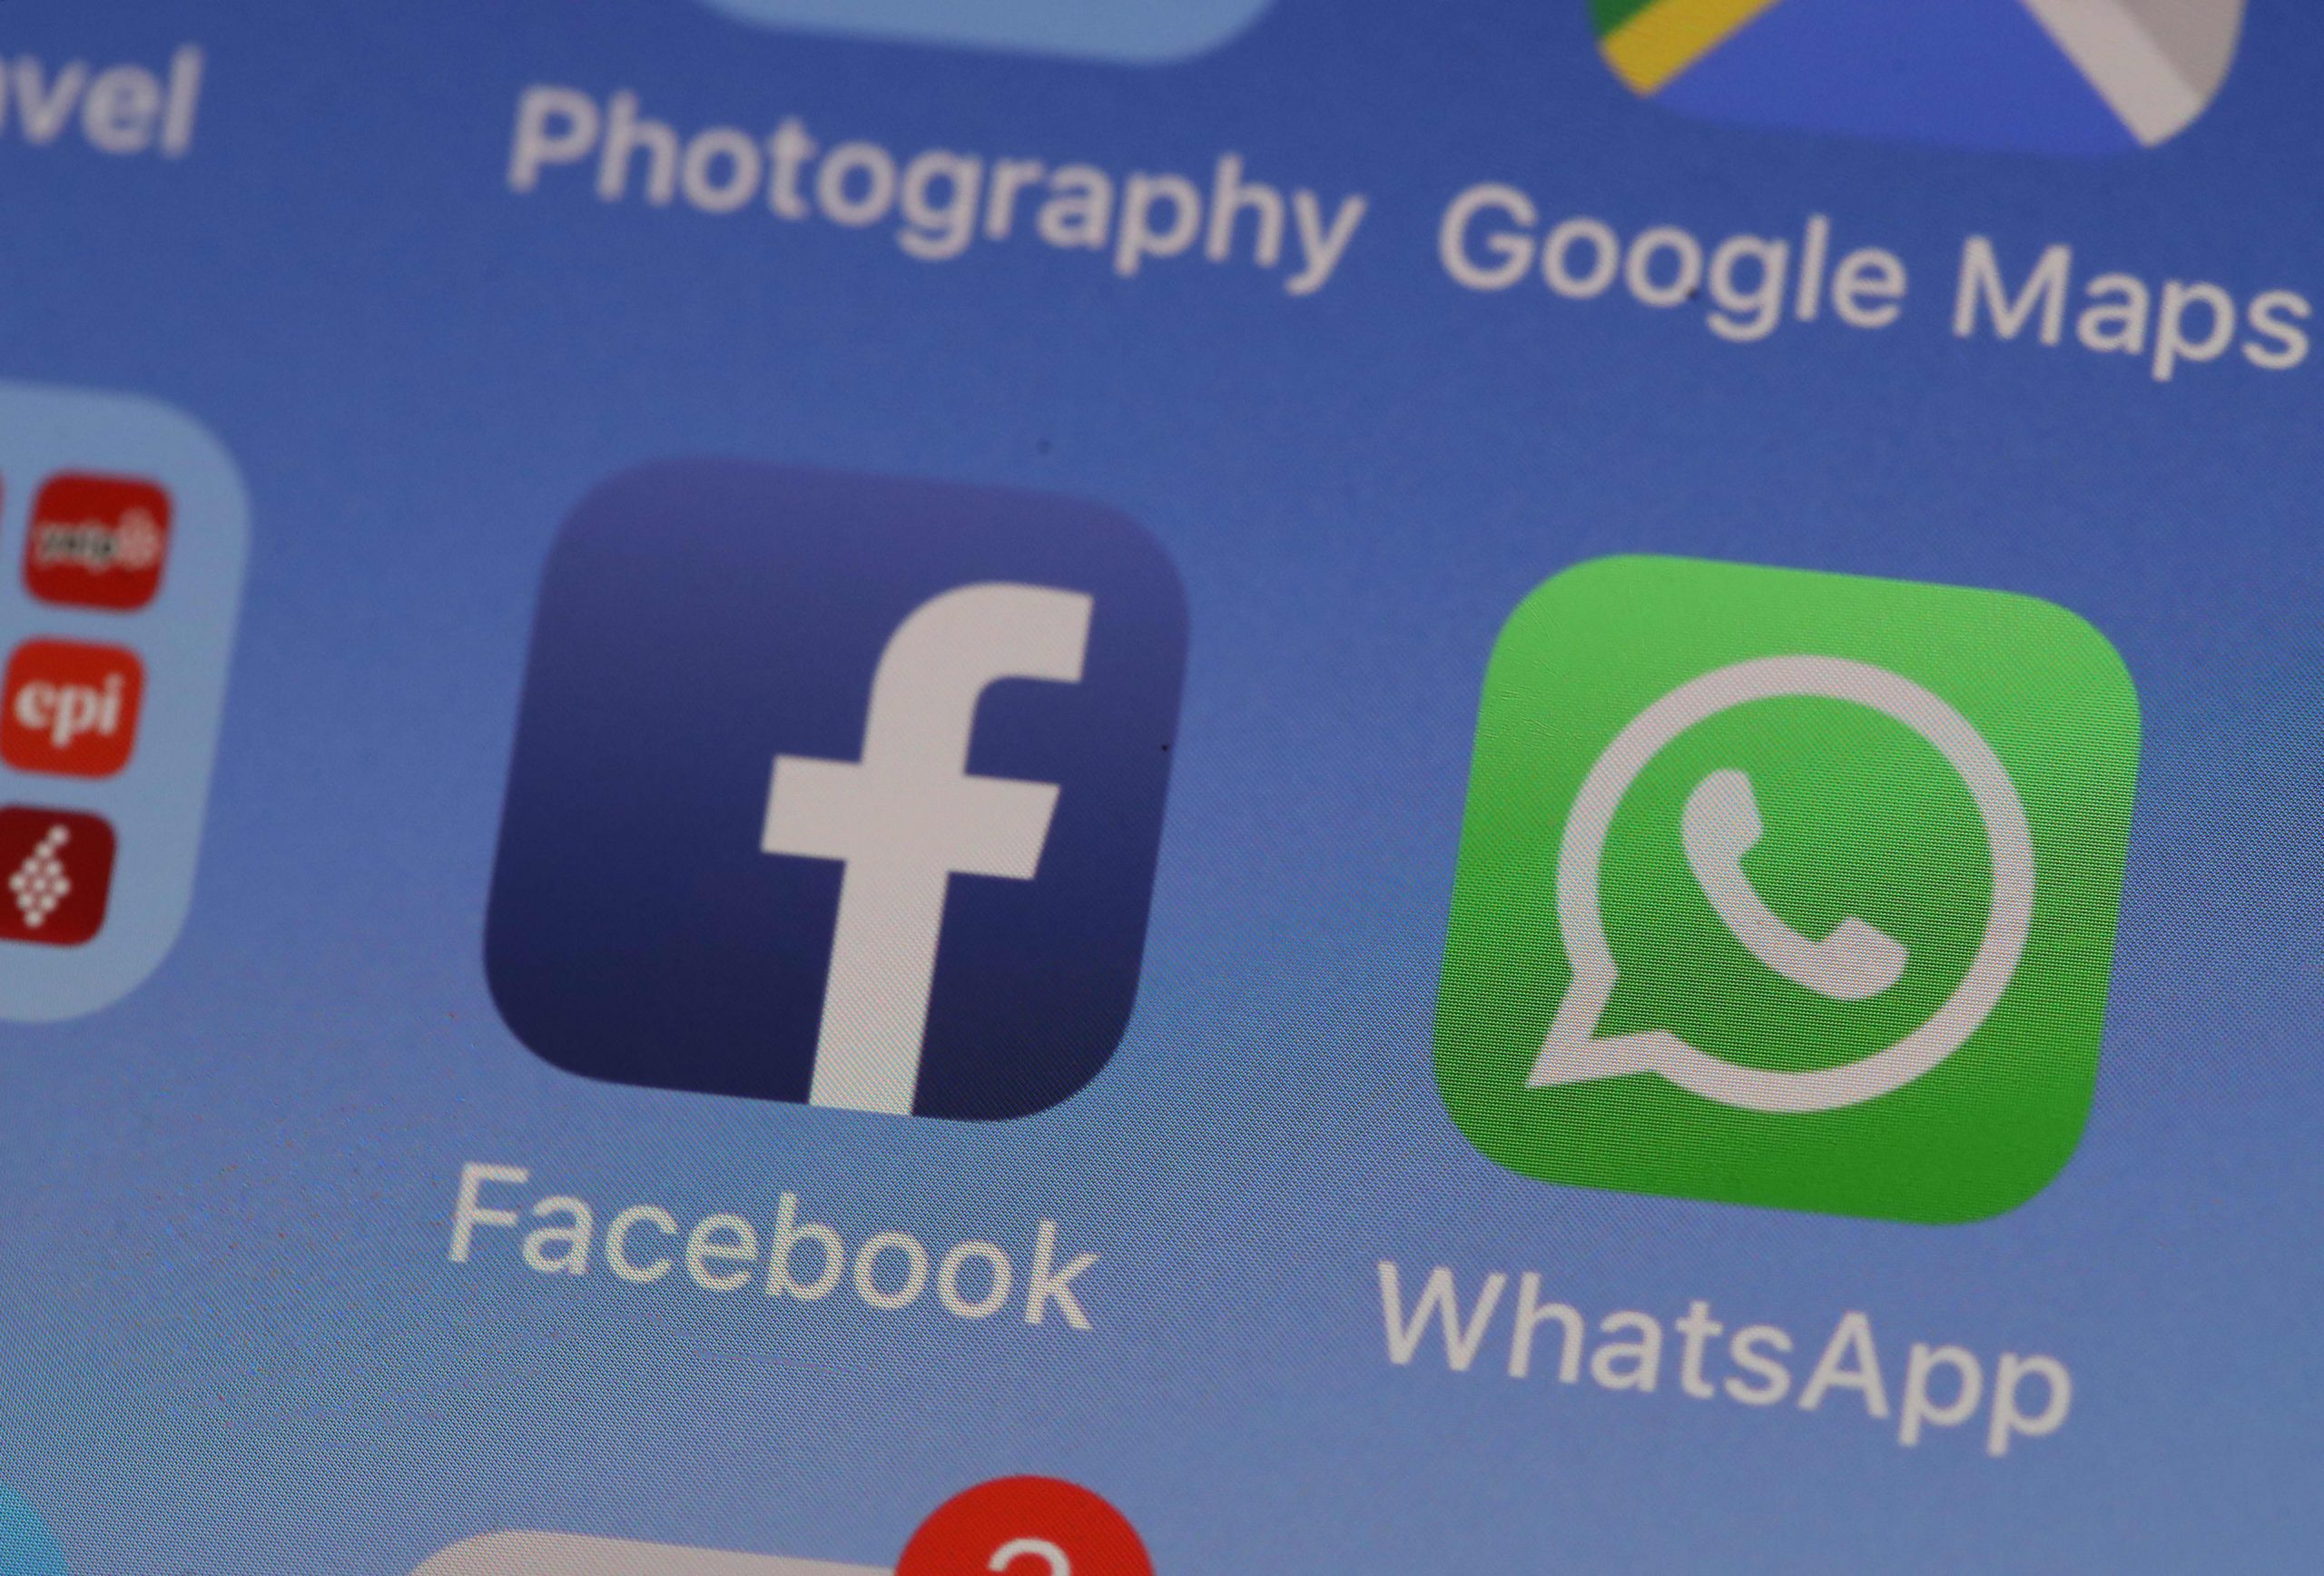 India has reportedly requested WhatsApp to withdraw the privacy policy update